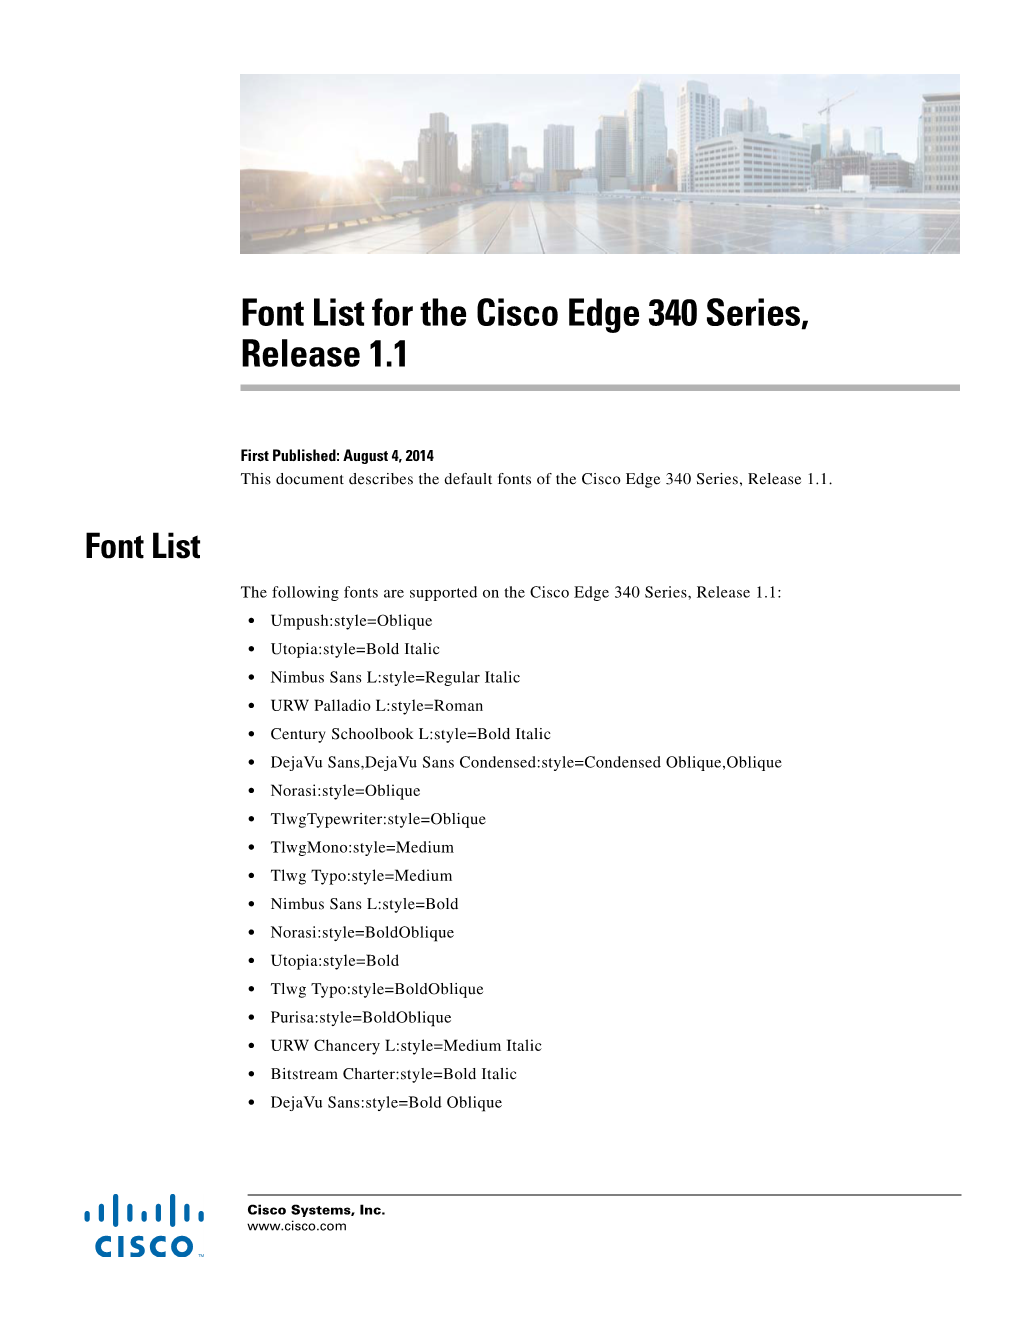 Font List for the Cisco Edge 340 Series, Release 1.1